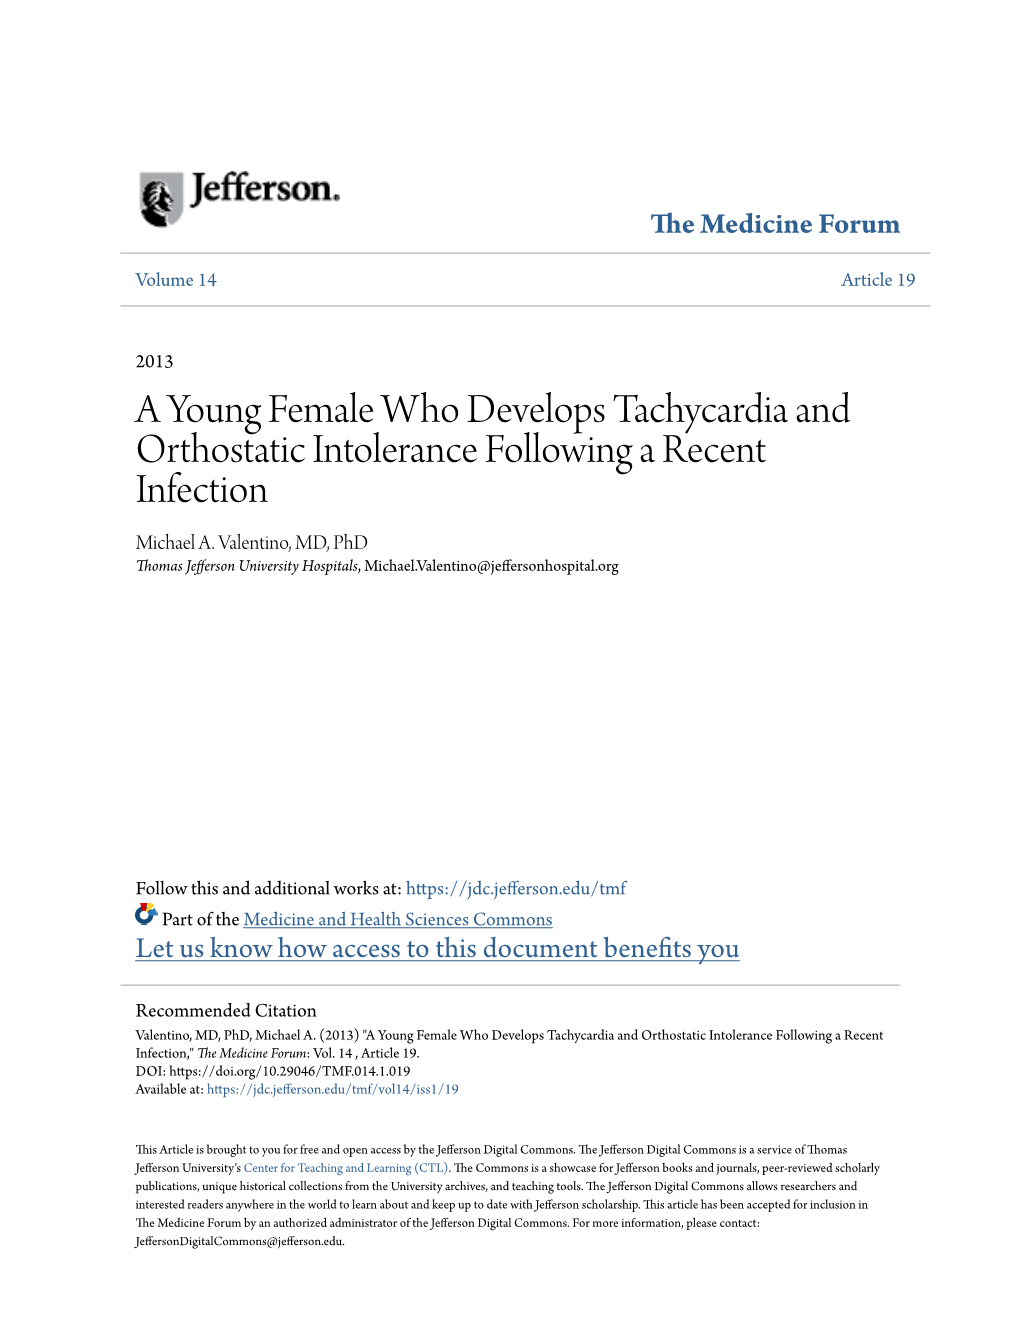 A Young Female Who Develops Tachycardia and Orthostatic Intolerance Following a Recent Infection Michael A